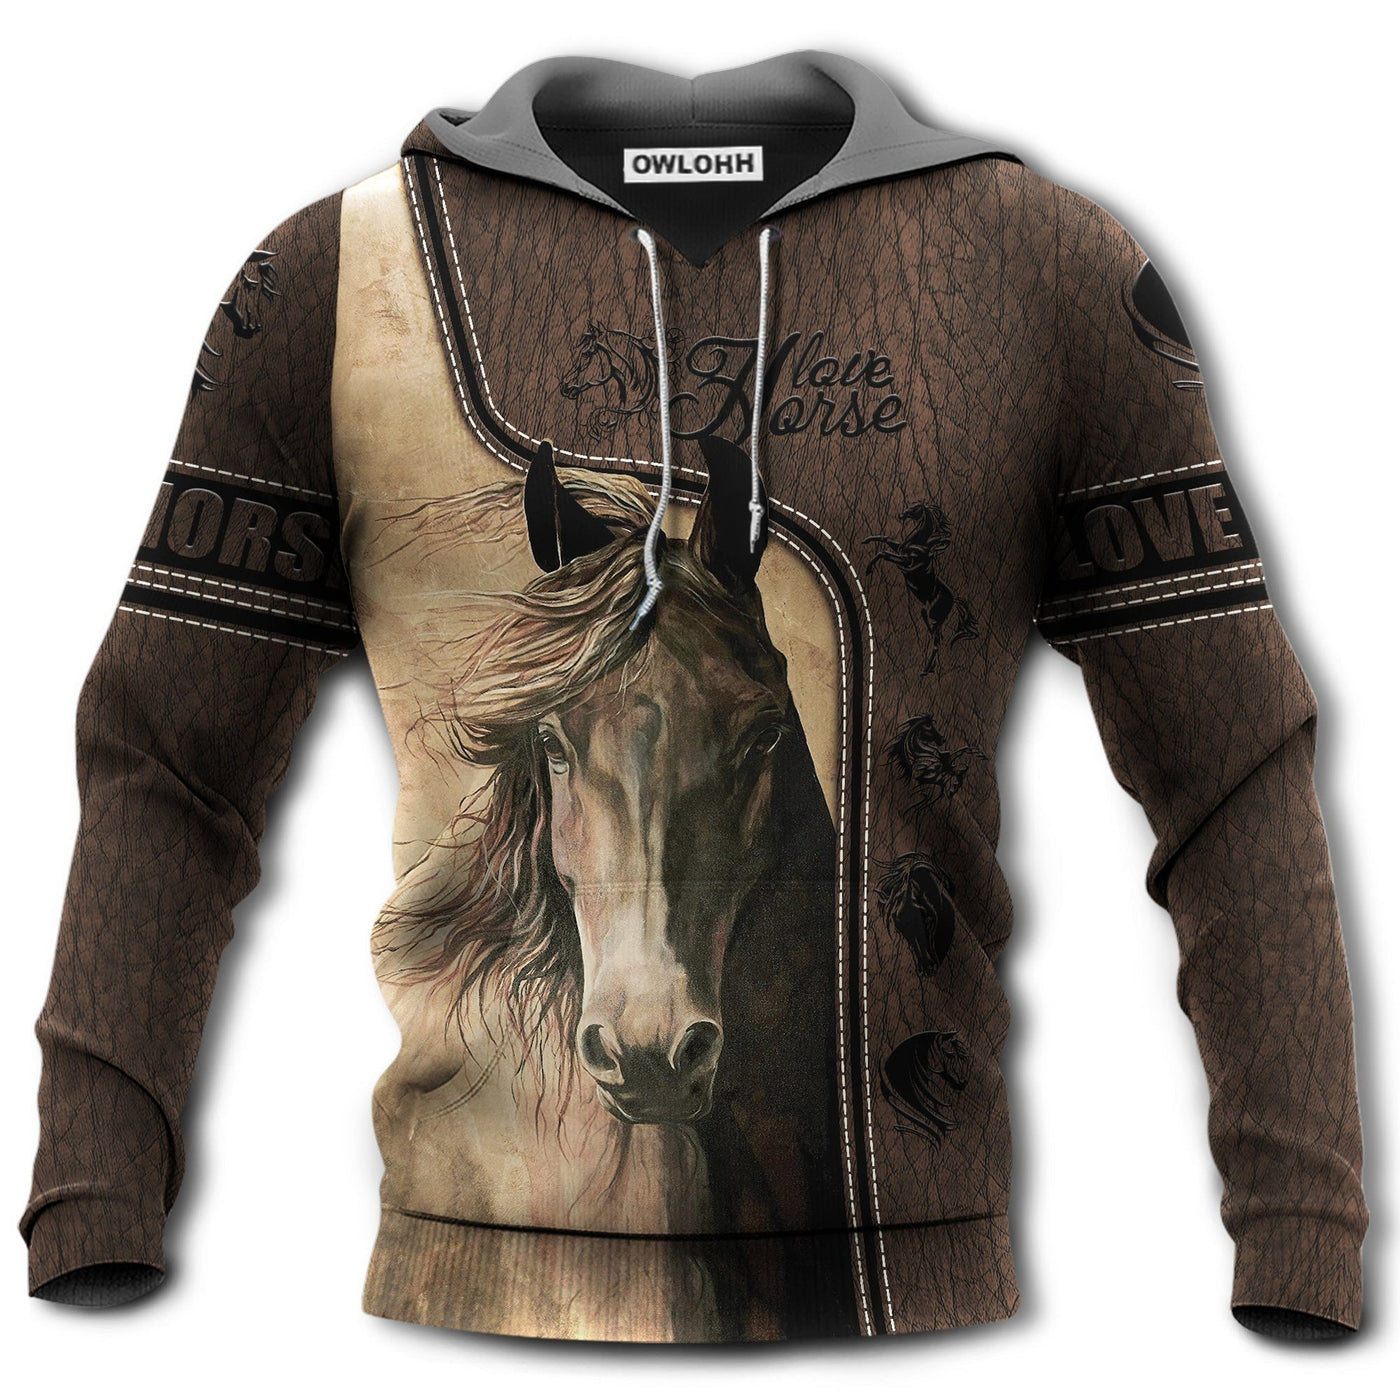 Unisex Hoodie / S Horse Want To Be A Strong Horse - Hoodie - Owls Matrix LTD